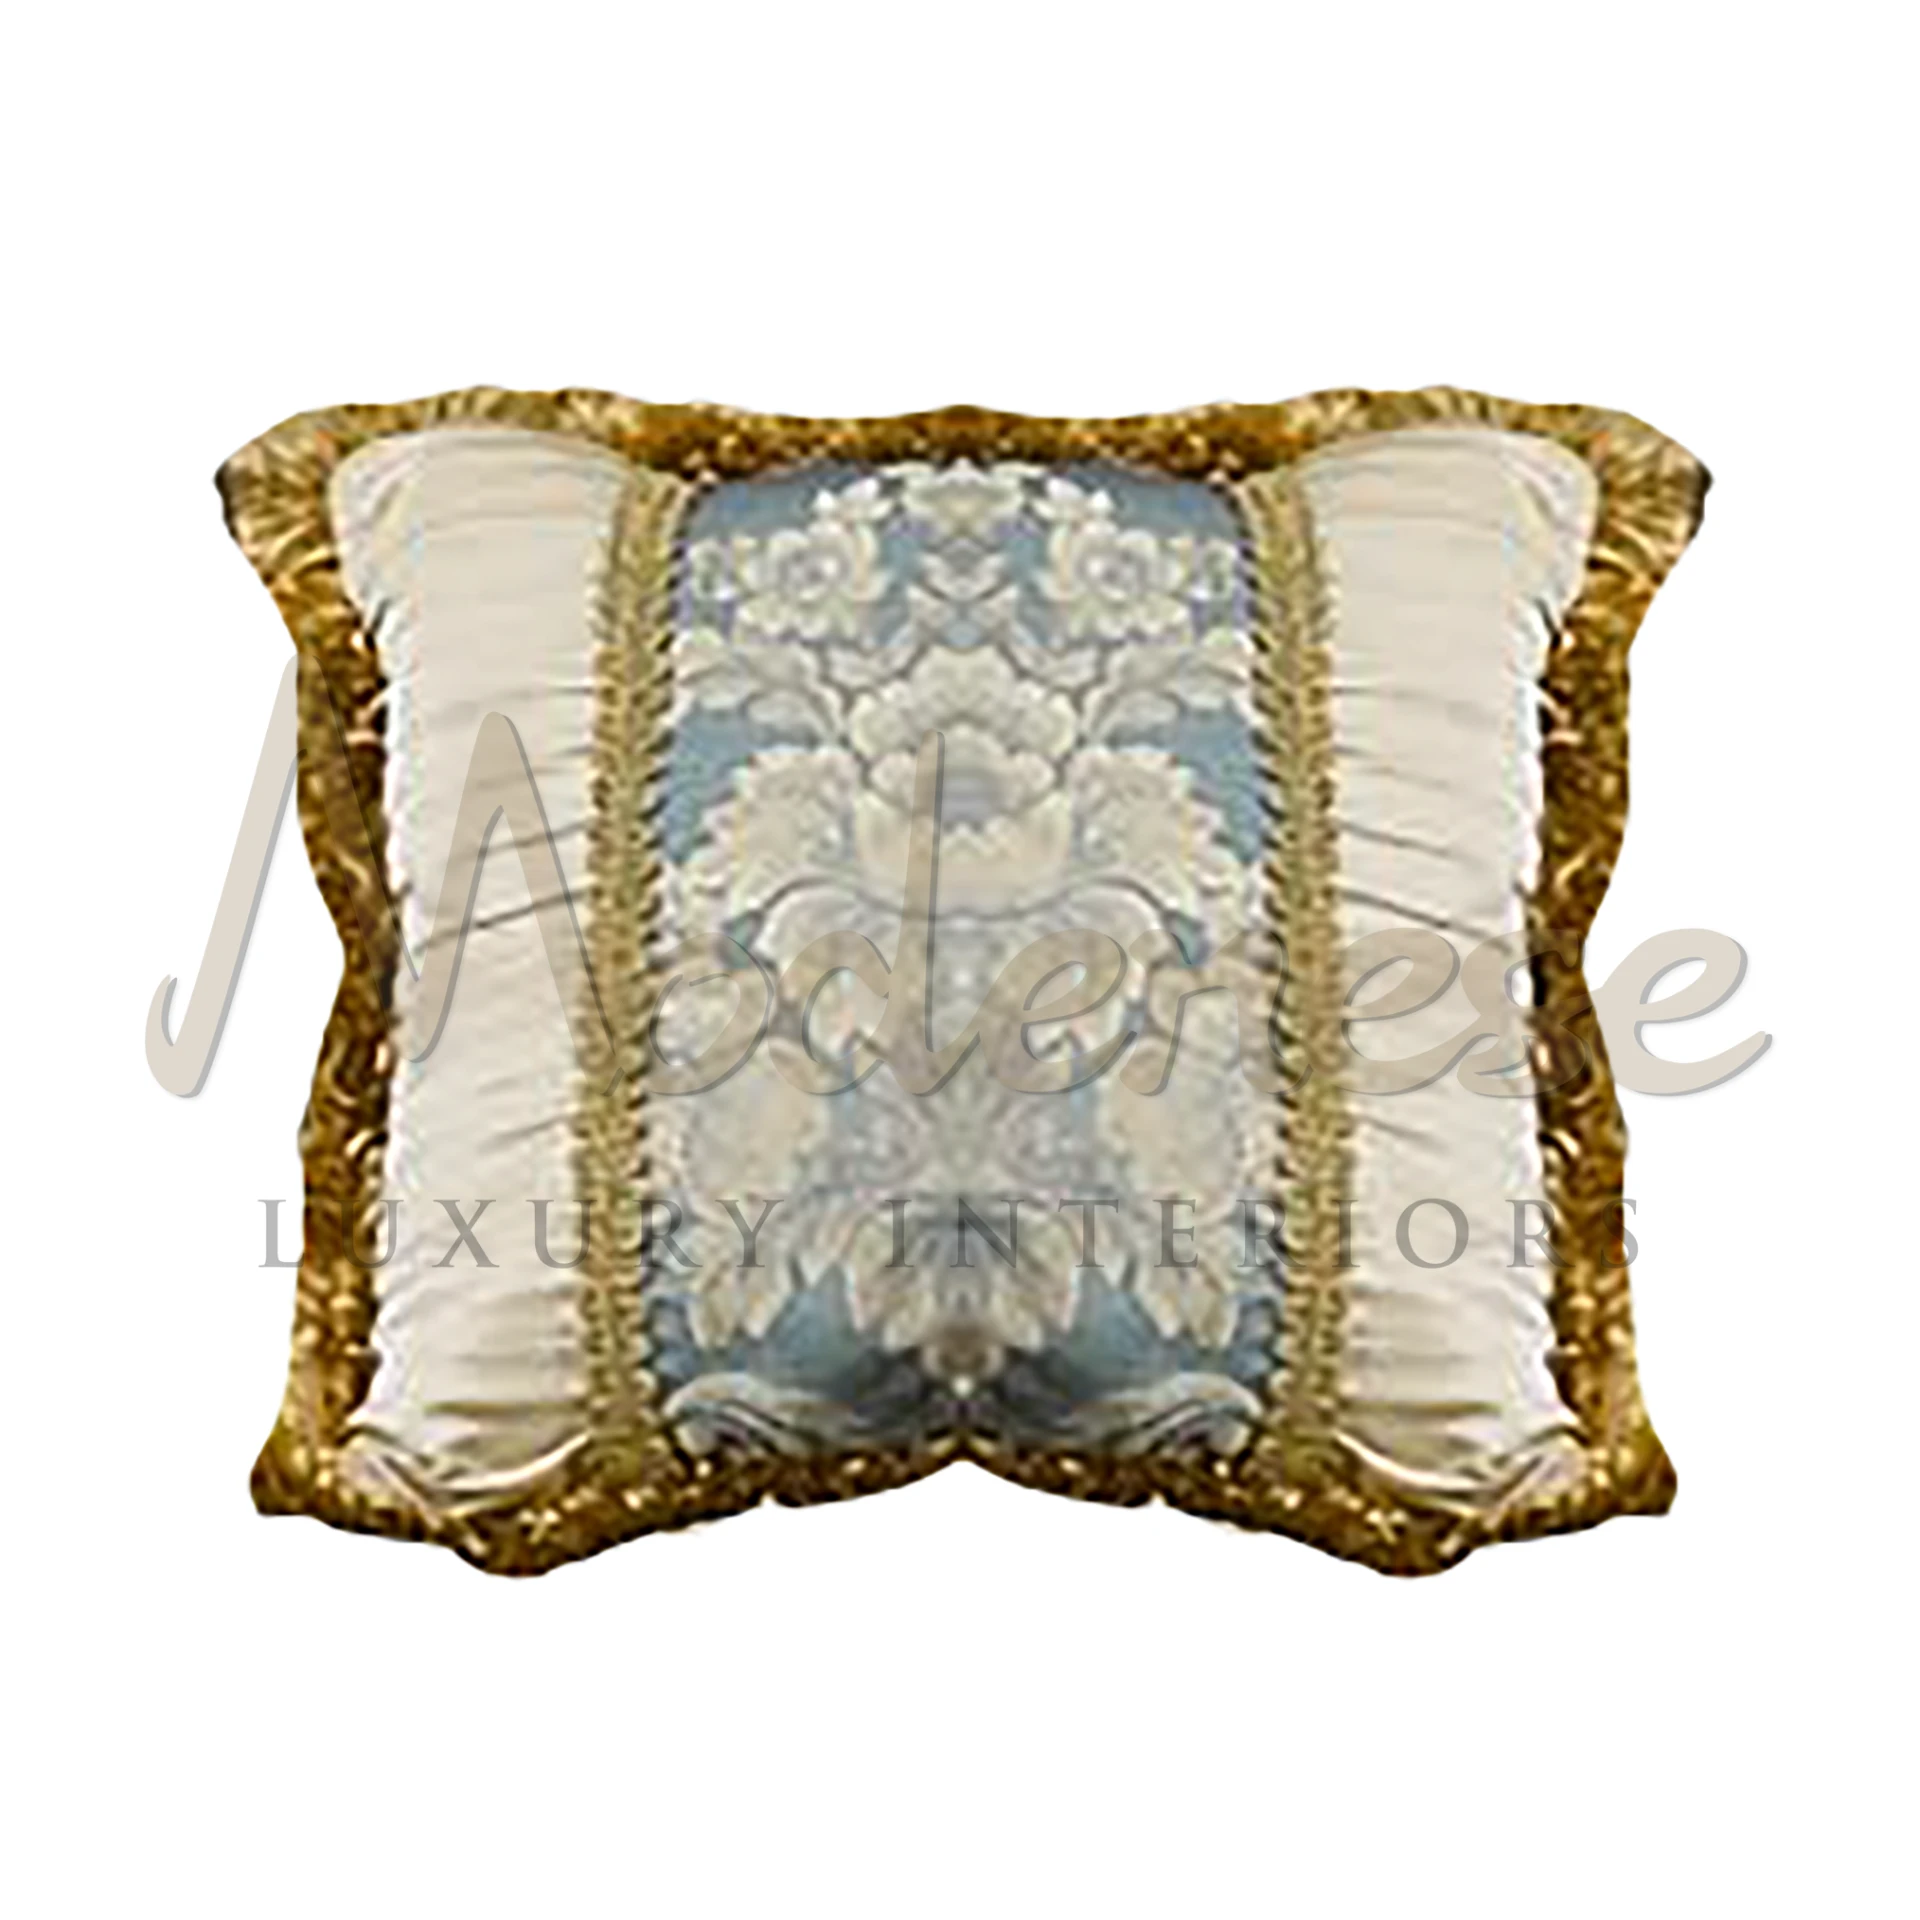 Victorian Pillow: Luxurious silk, brocade, and velvet with intricate patterns, offering opulent elegance in every detail.